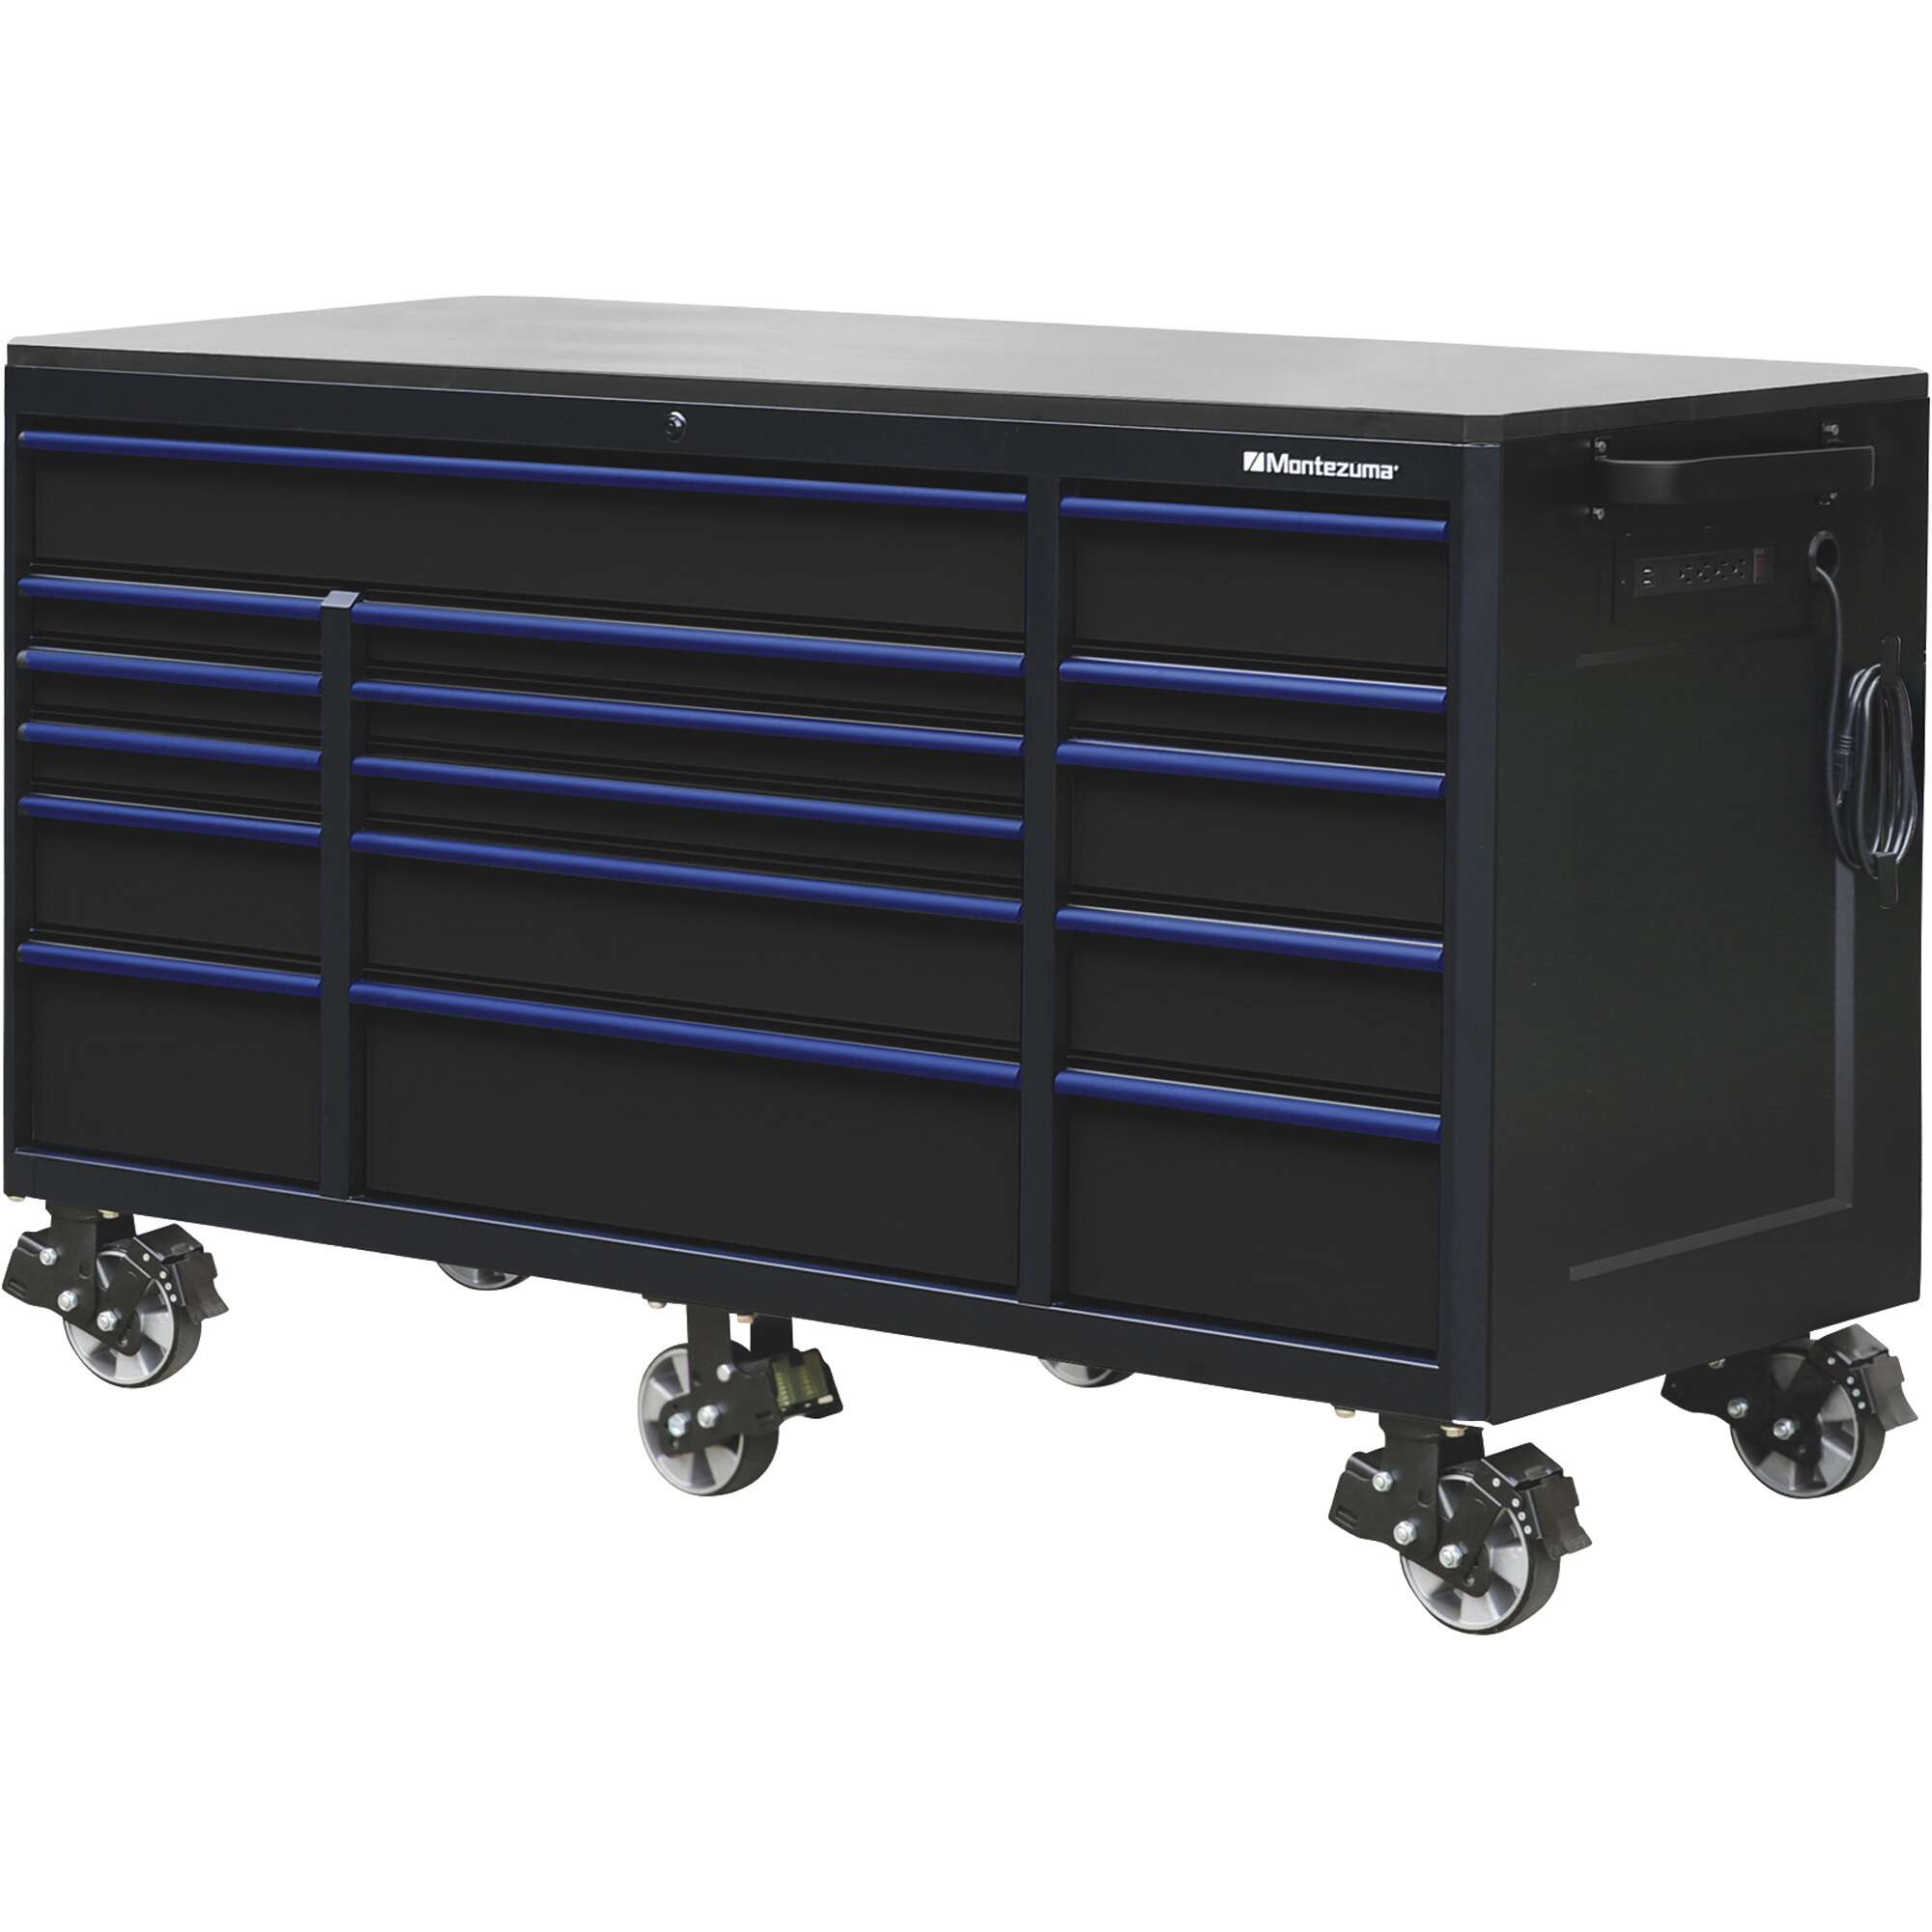 Montezuma 72in x 30in 16 Drawer Rolling Tool Cabinet 72 5 8inW x 29 78inD x 41 34inH Black